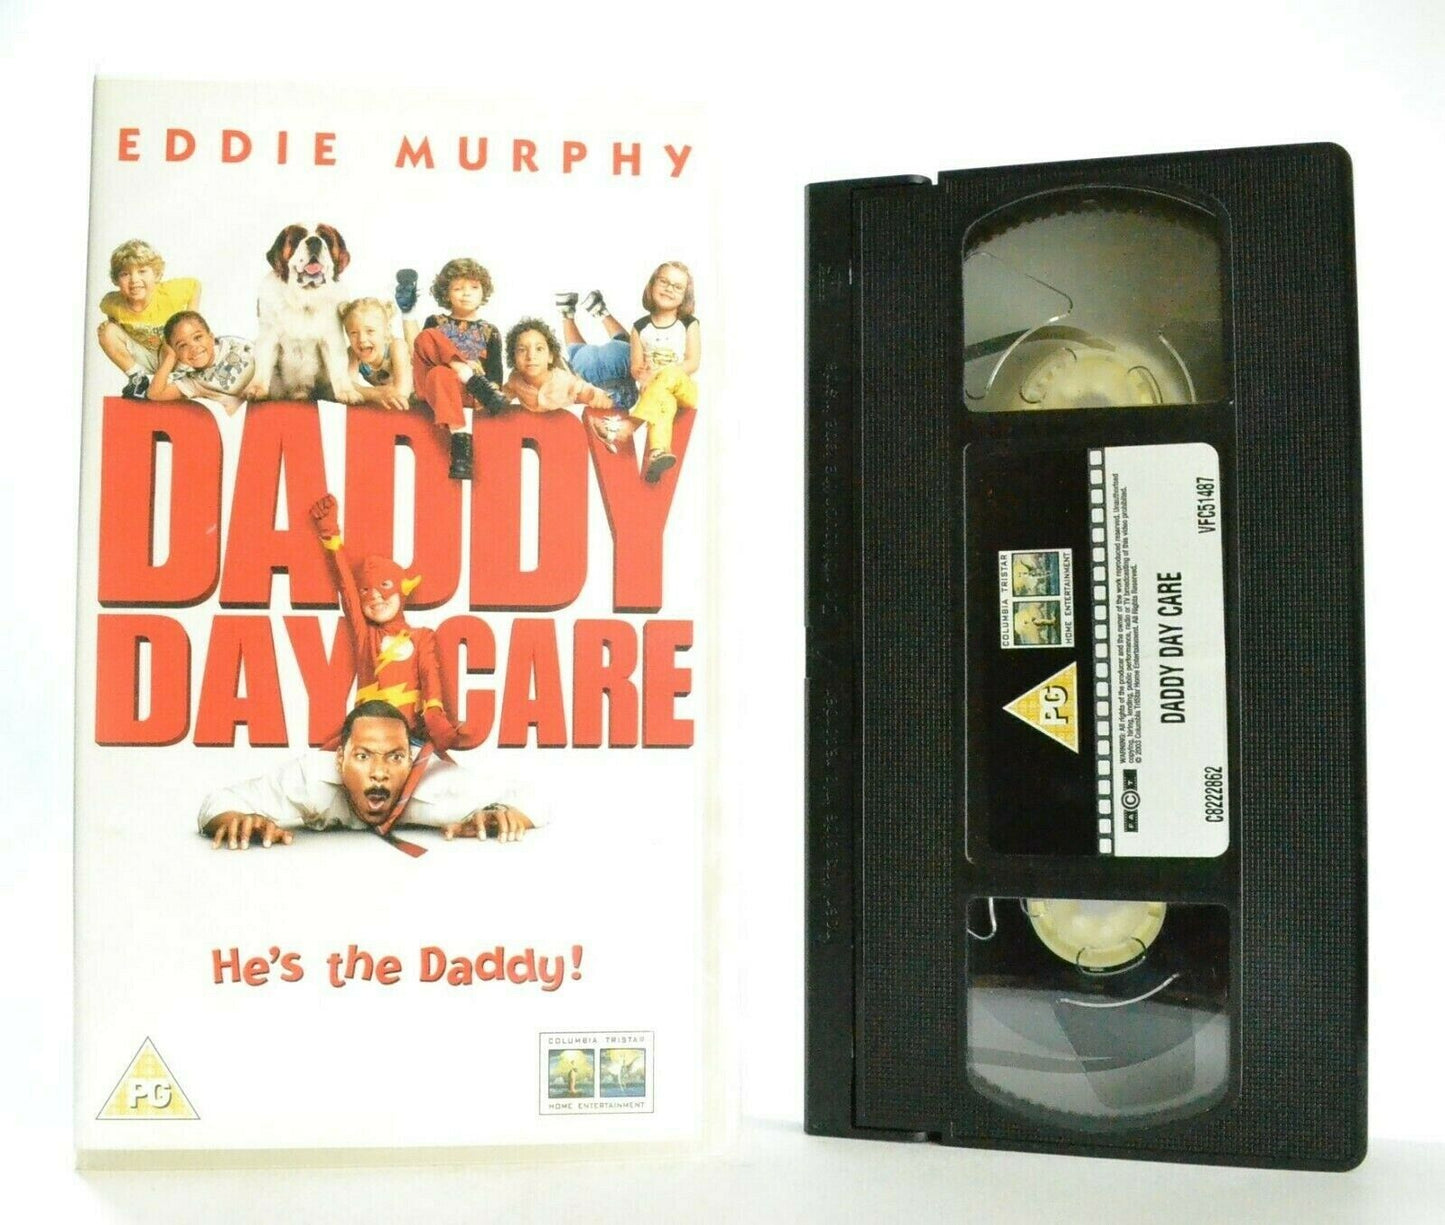 Daddy Day Care: Columbia Pictures (2003) - Family Comedy - Eddie Murphy - VHS-